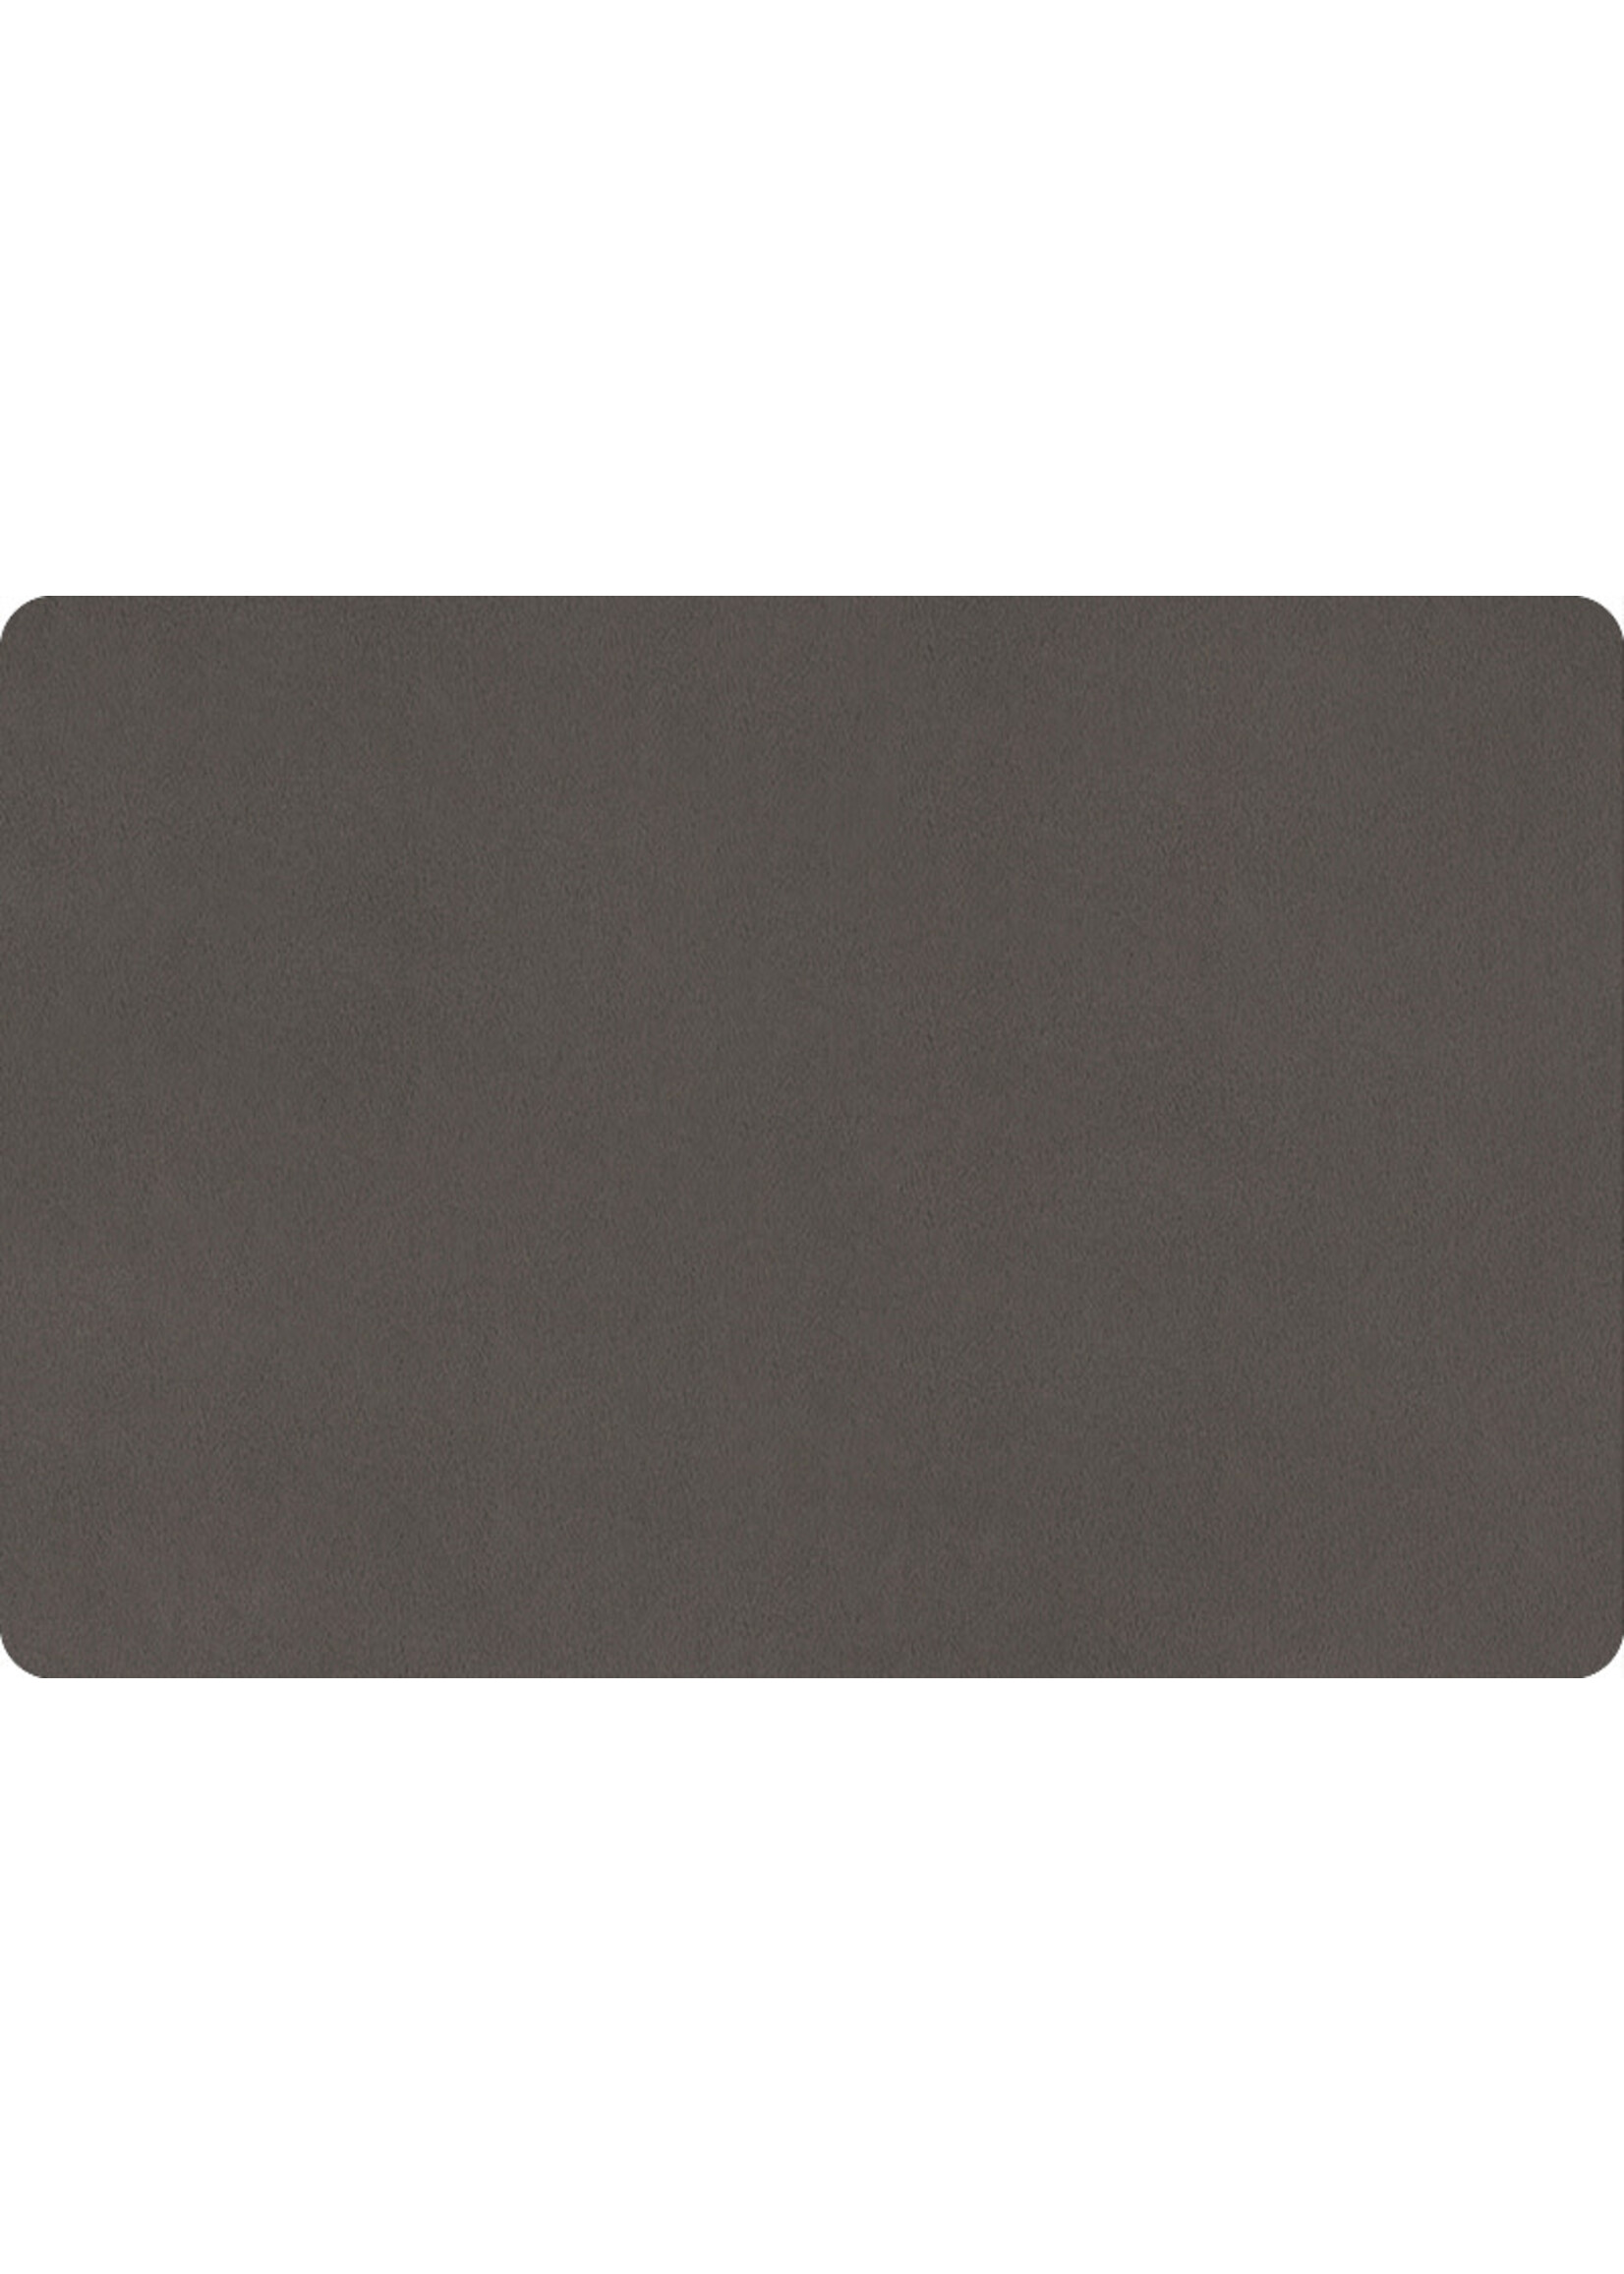 Shannon Fabrics Minky, Extra Wide Solid Cuddle3, 90" Pewter, (by the inch)